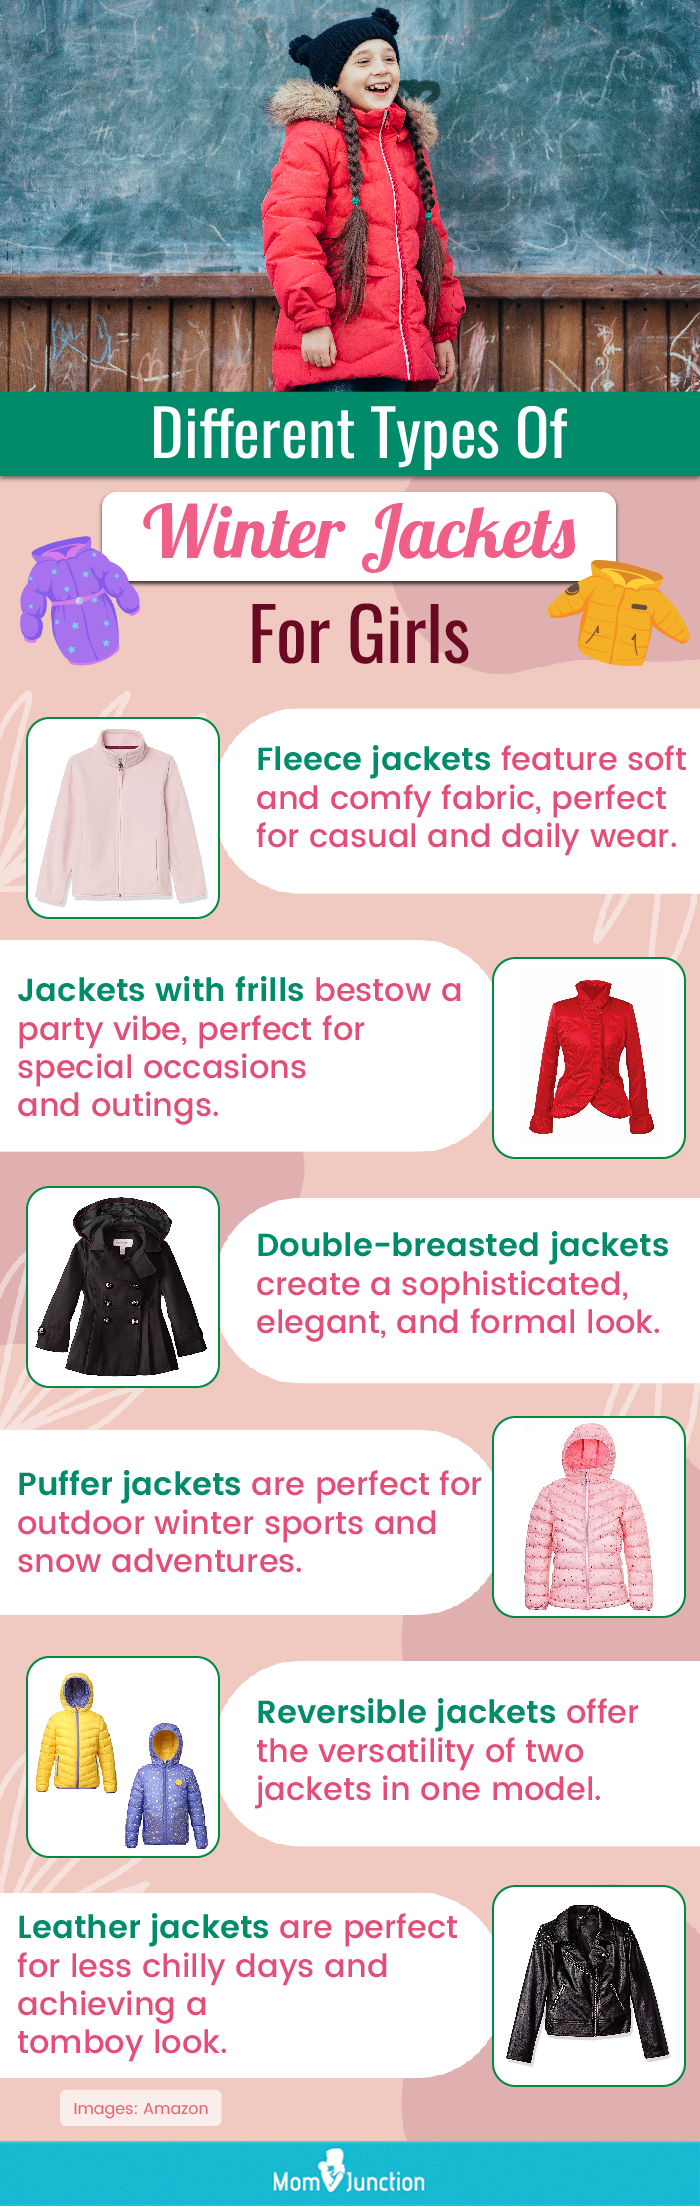 Different Types Of Winter Jackets For Girls (infographic)